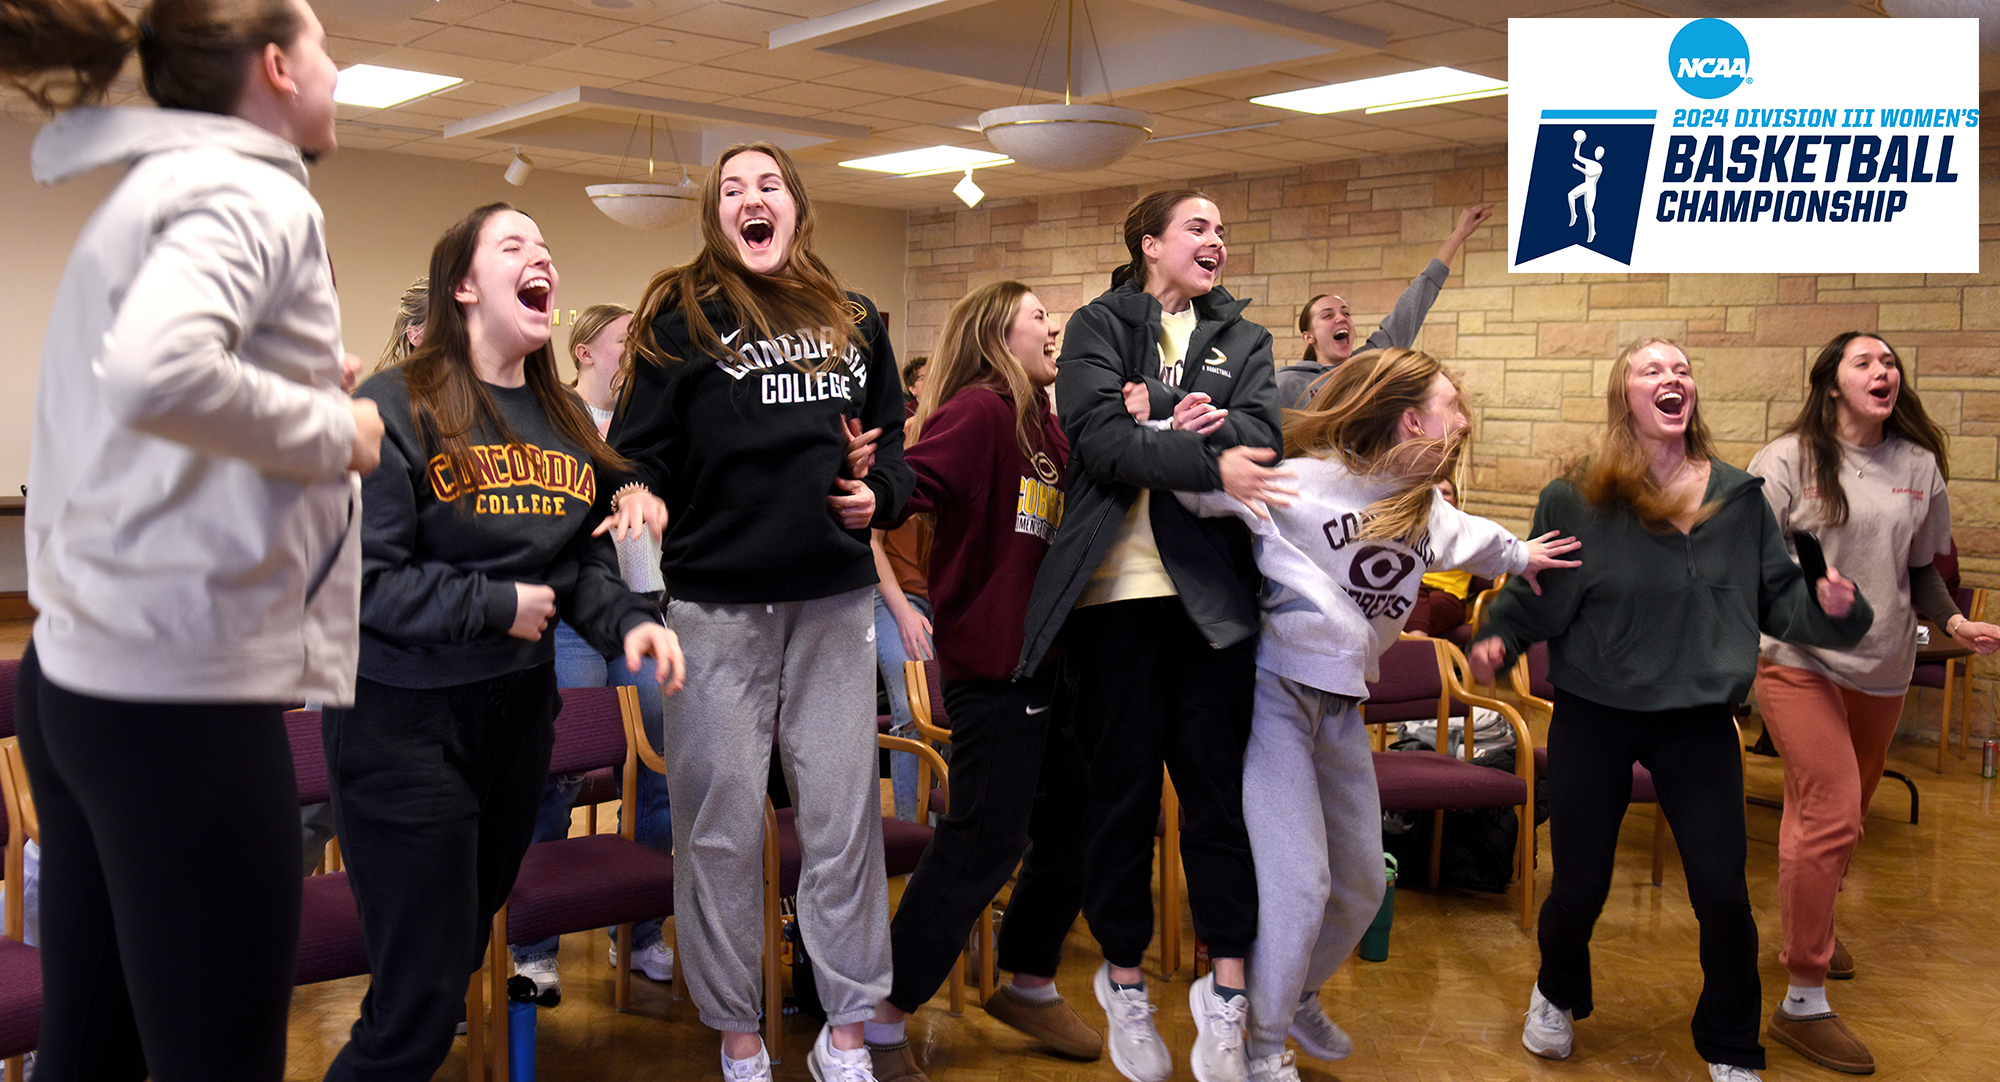 Members of the Cobber women's basketball team react to the announcement that they earned a spot in the NCAA Tournament.